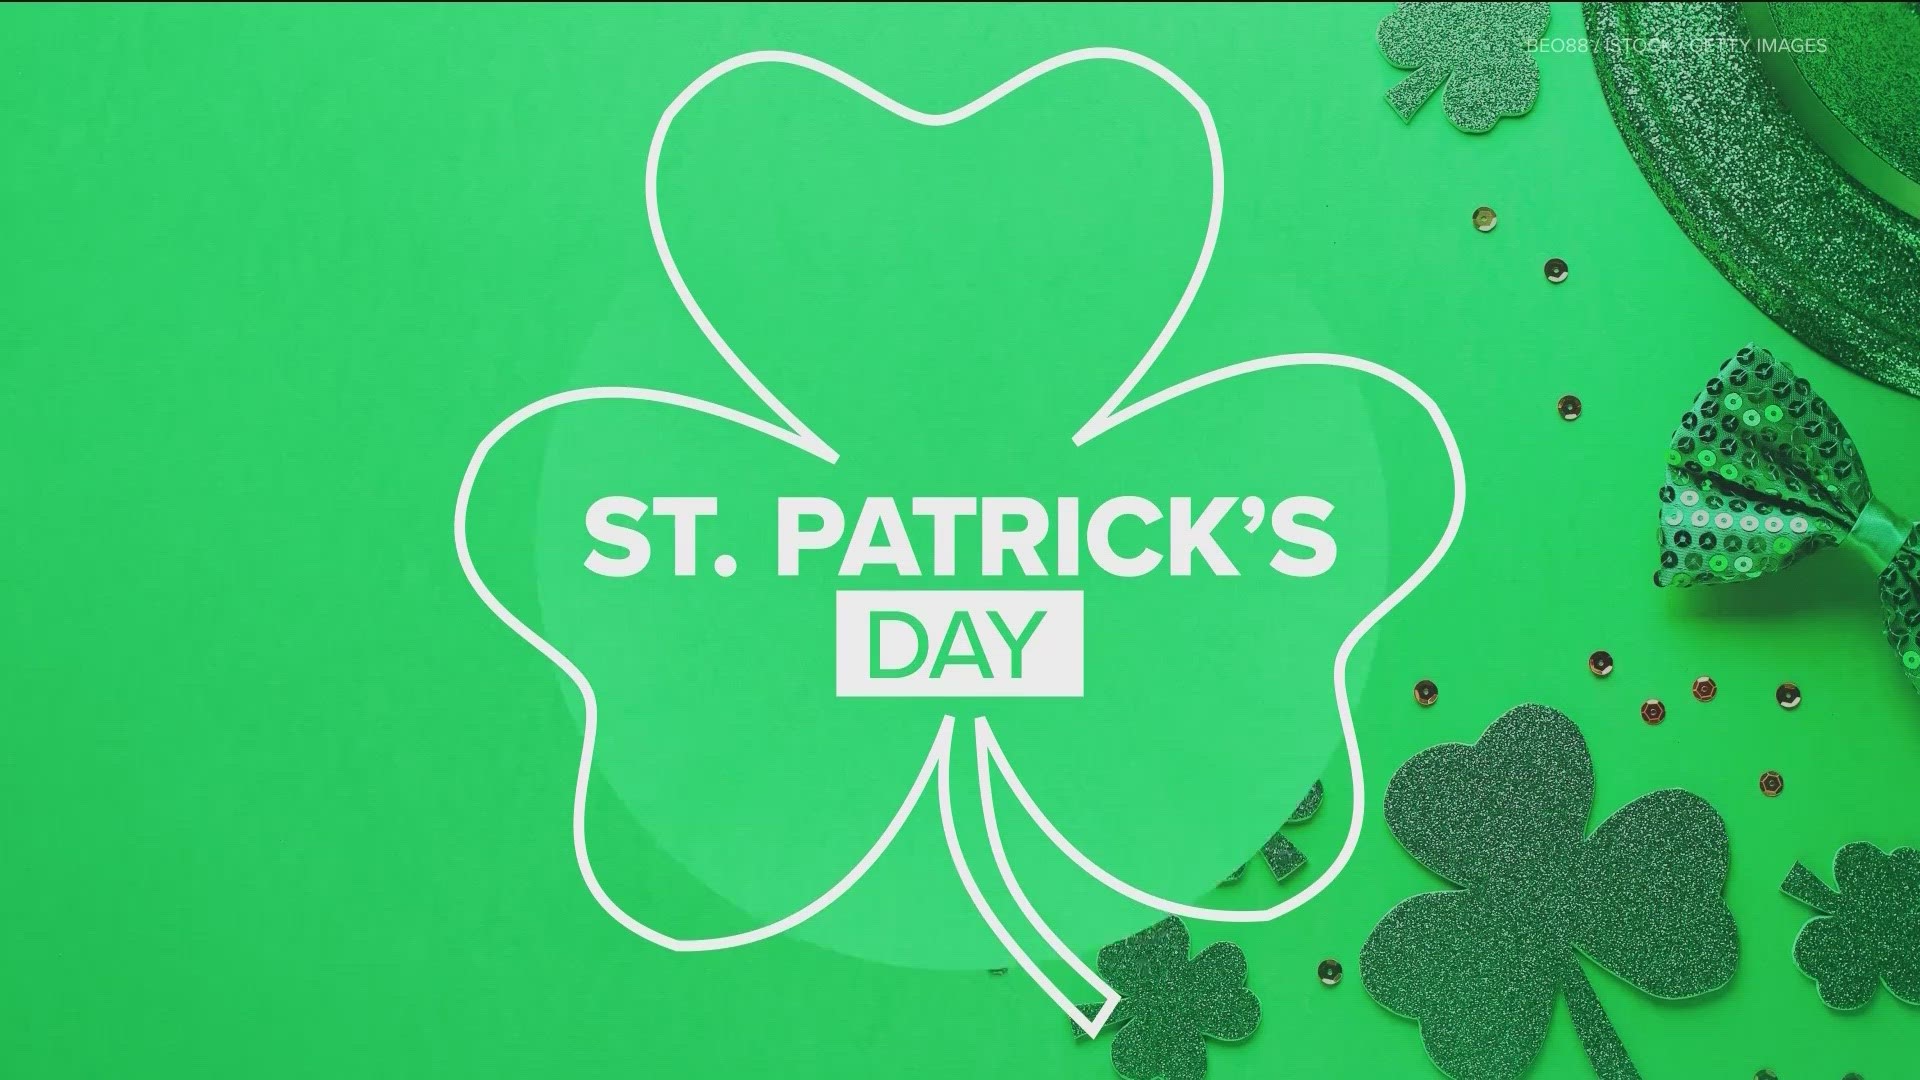 KVUE's Eric Pointer tells us about some of the Austin businesses prepared for St. Patrick's Day fun.